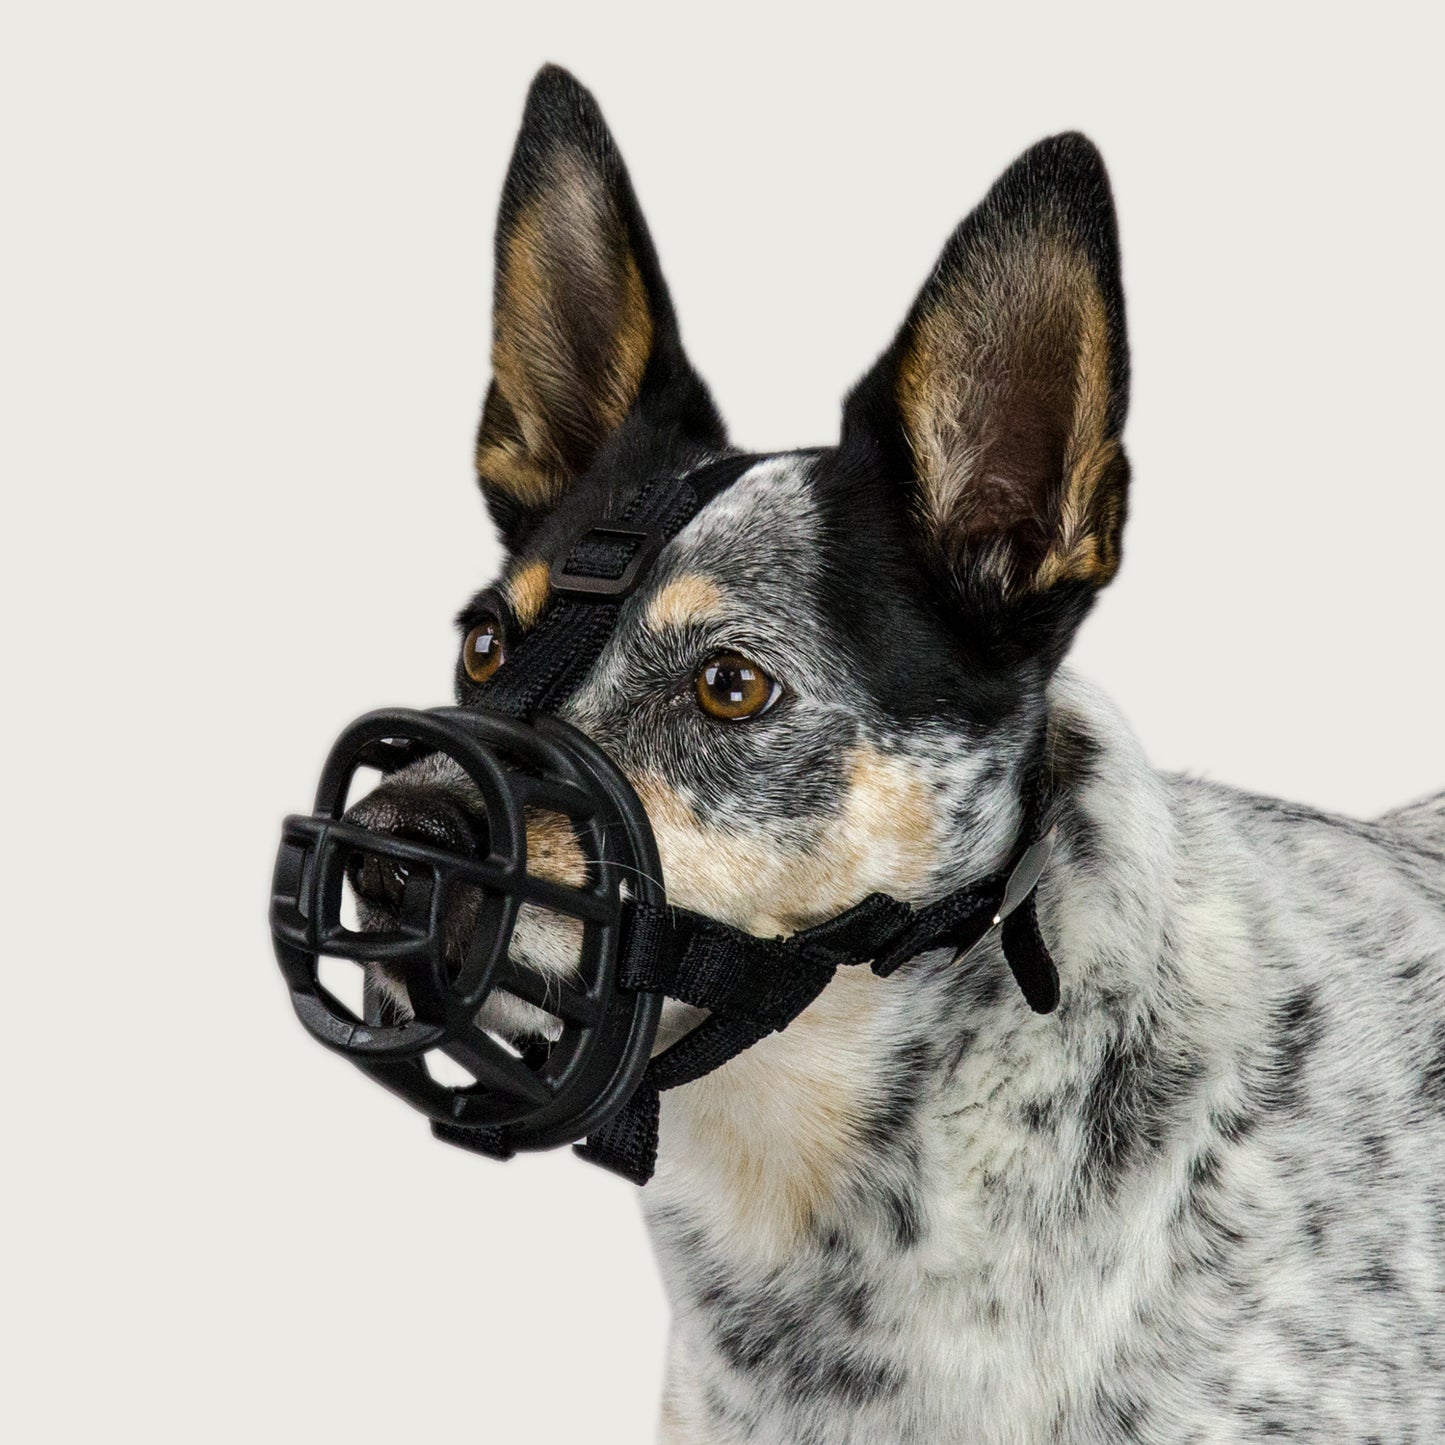 baskerville muzzle for dog as shown on canine